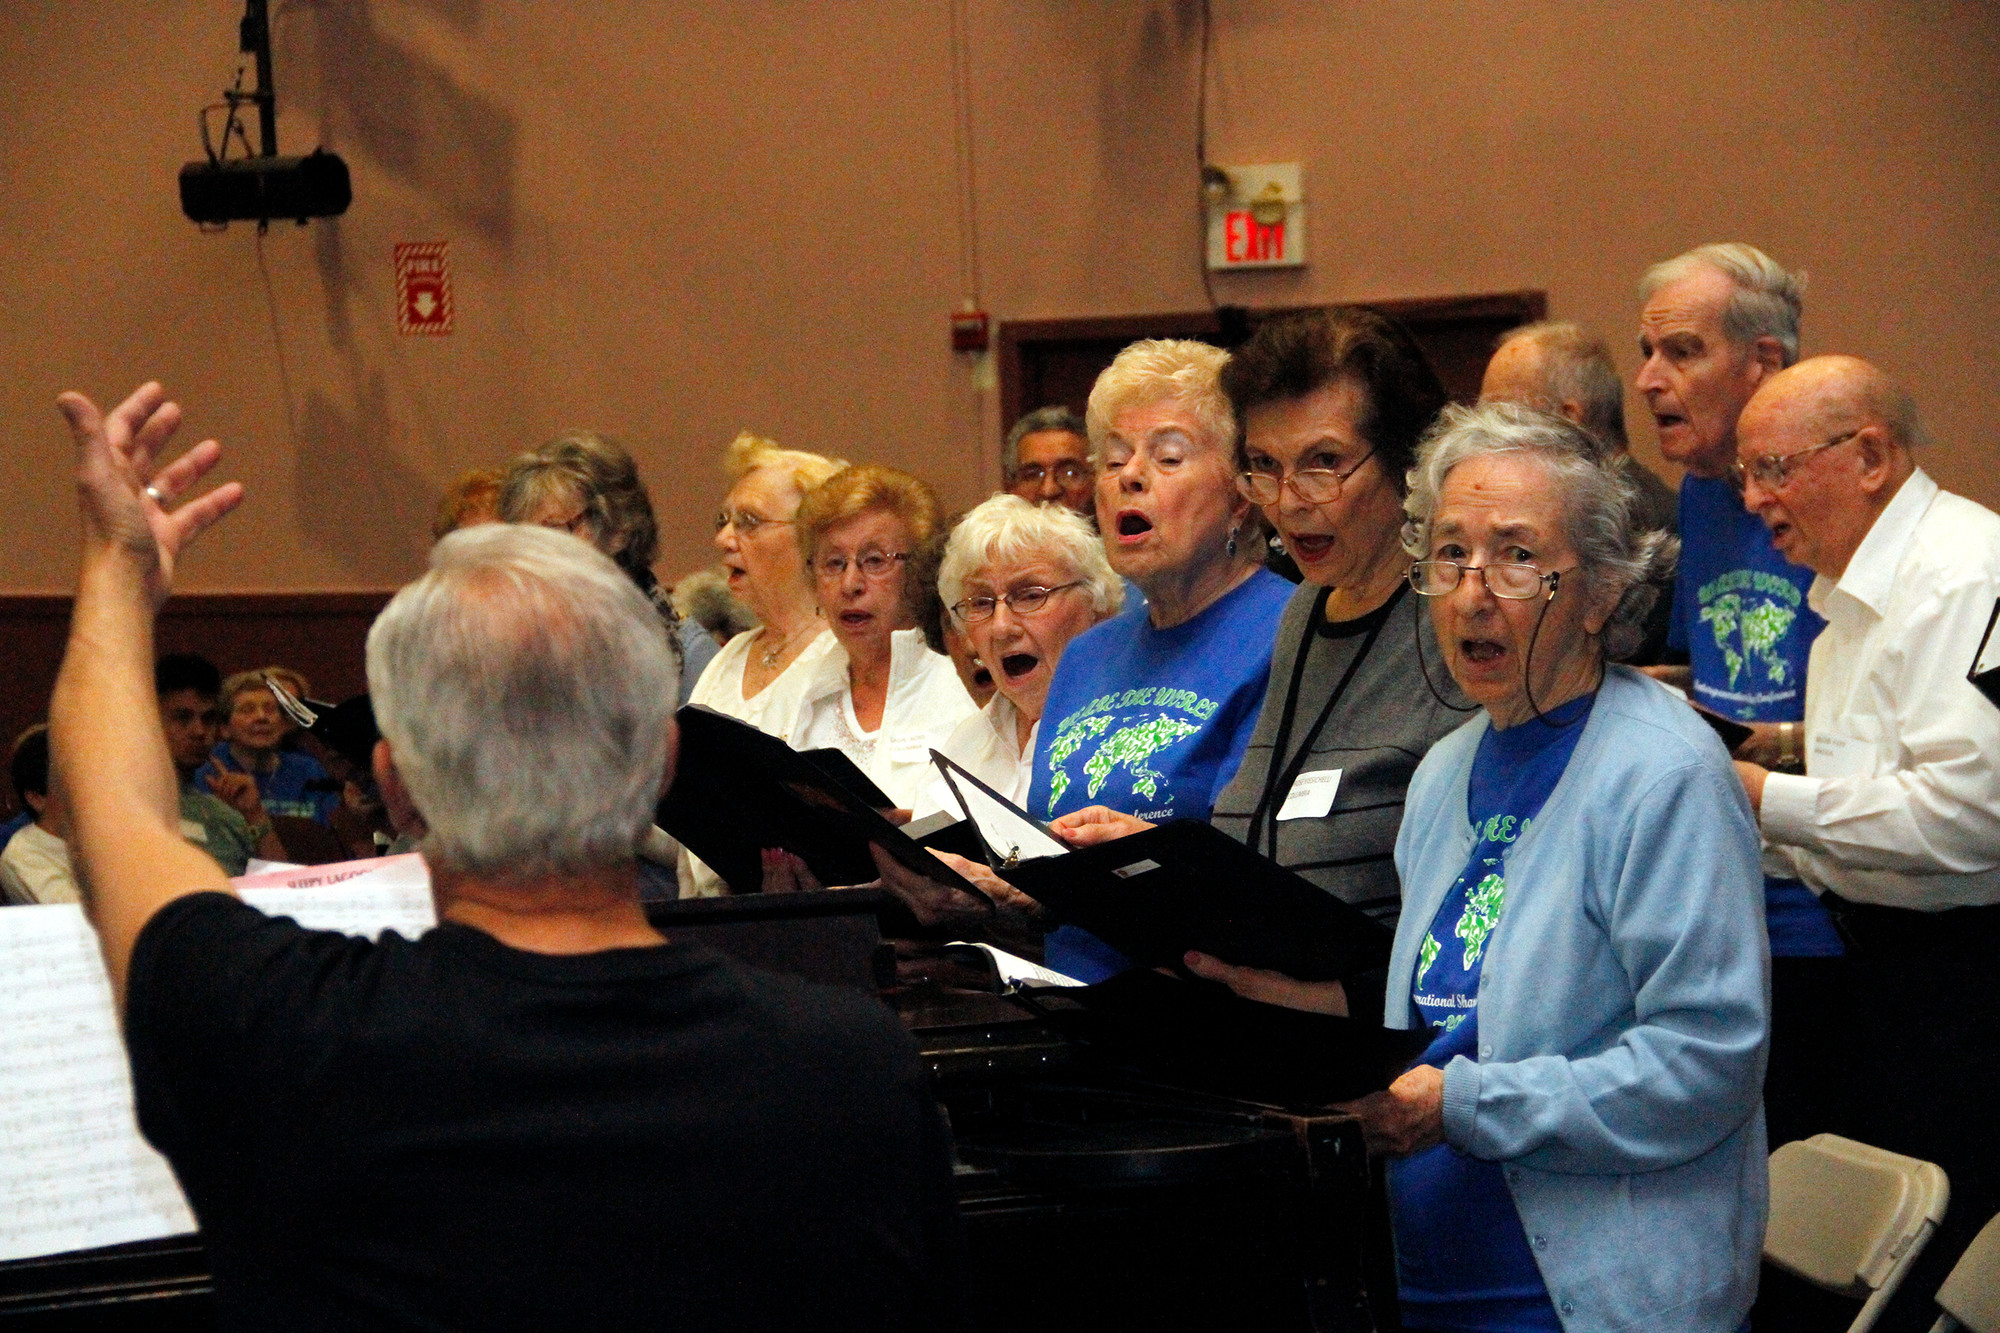 Frank Scafuri conducted the Center Stage Singers.